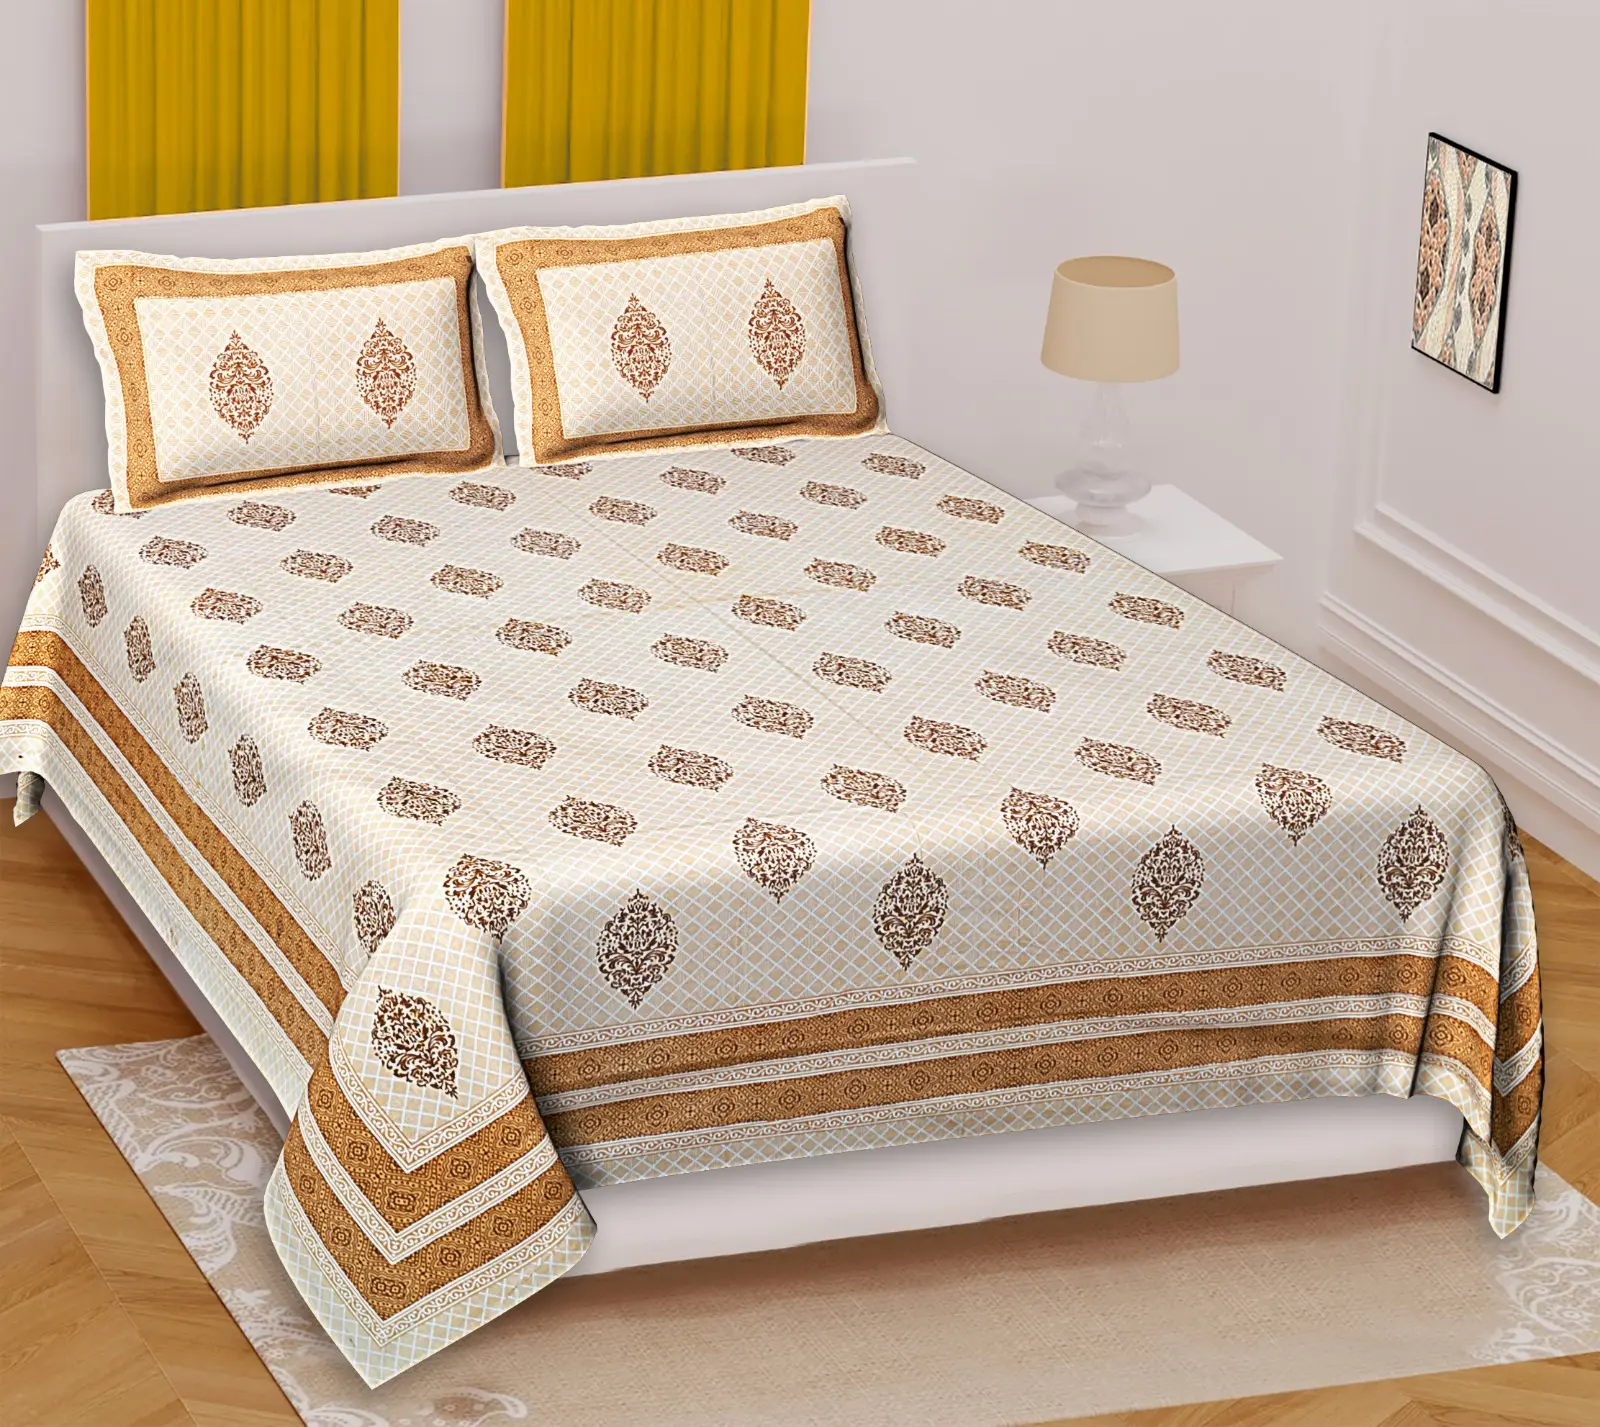 Newly design printed beautiful cotton Bed sheet available in bulk quantity at competitive prices from India